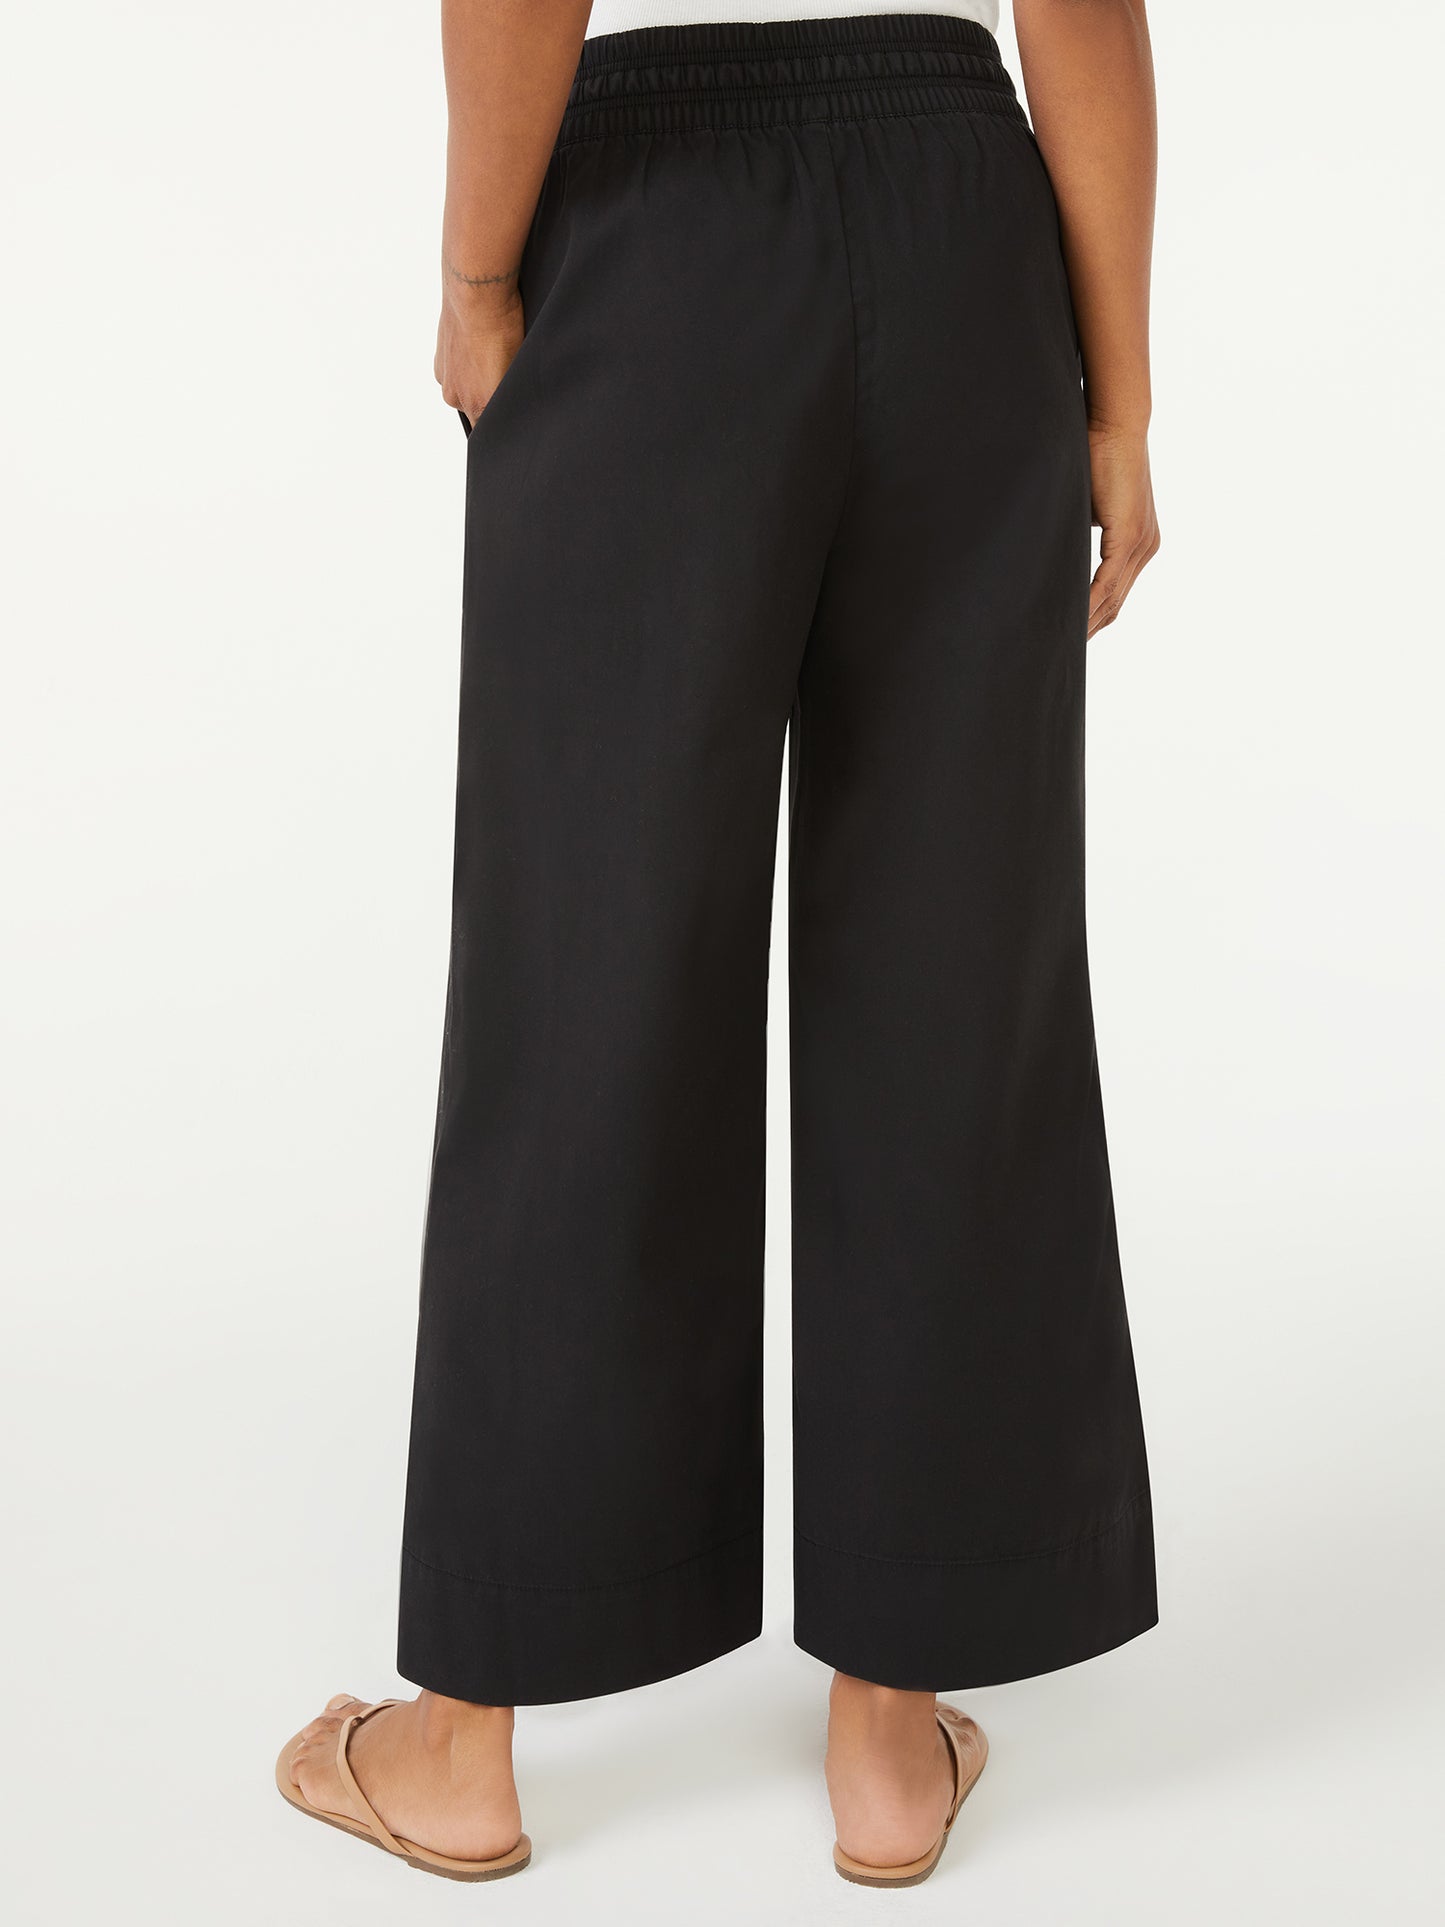 Free Assembly Womens Wide-Leg Pull-On Pants